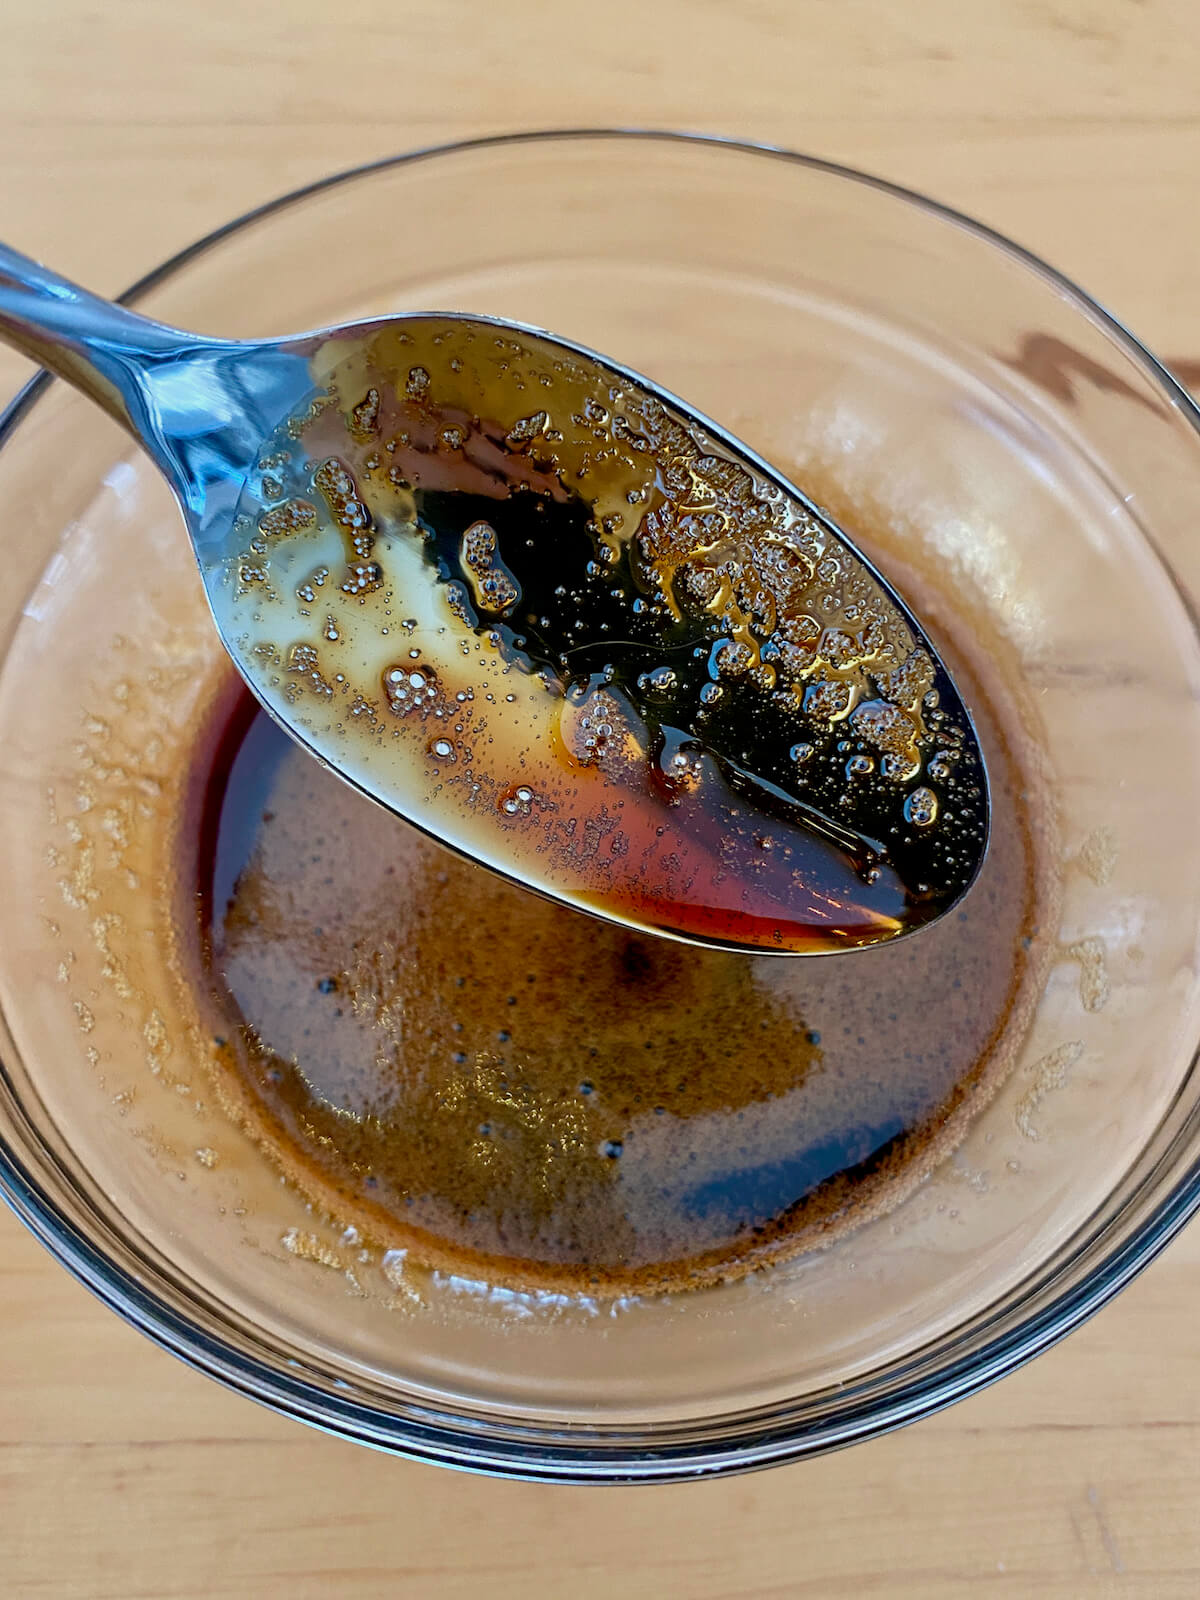 A metal spoon holding up some maple balsamic glaze over a small glass bowl.